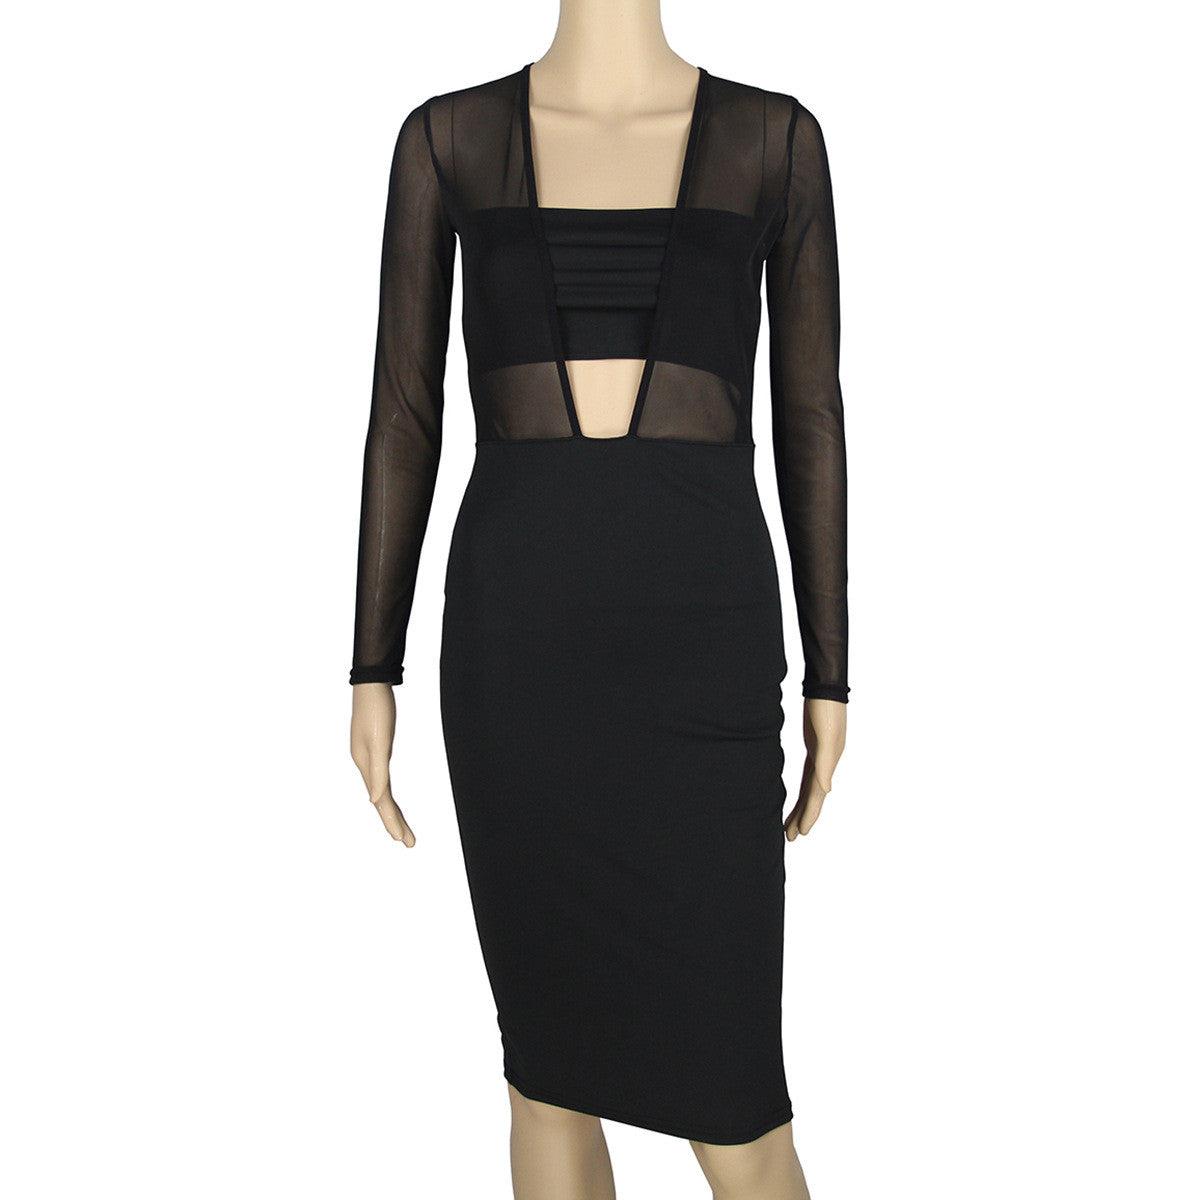 Black Mesh Patchwork Hollow Out Bodycon Knee-length Dress - Oh Yours Fashion - 6